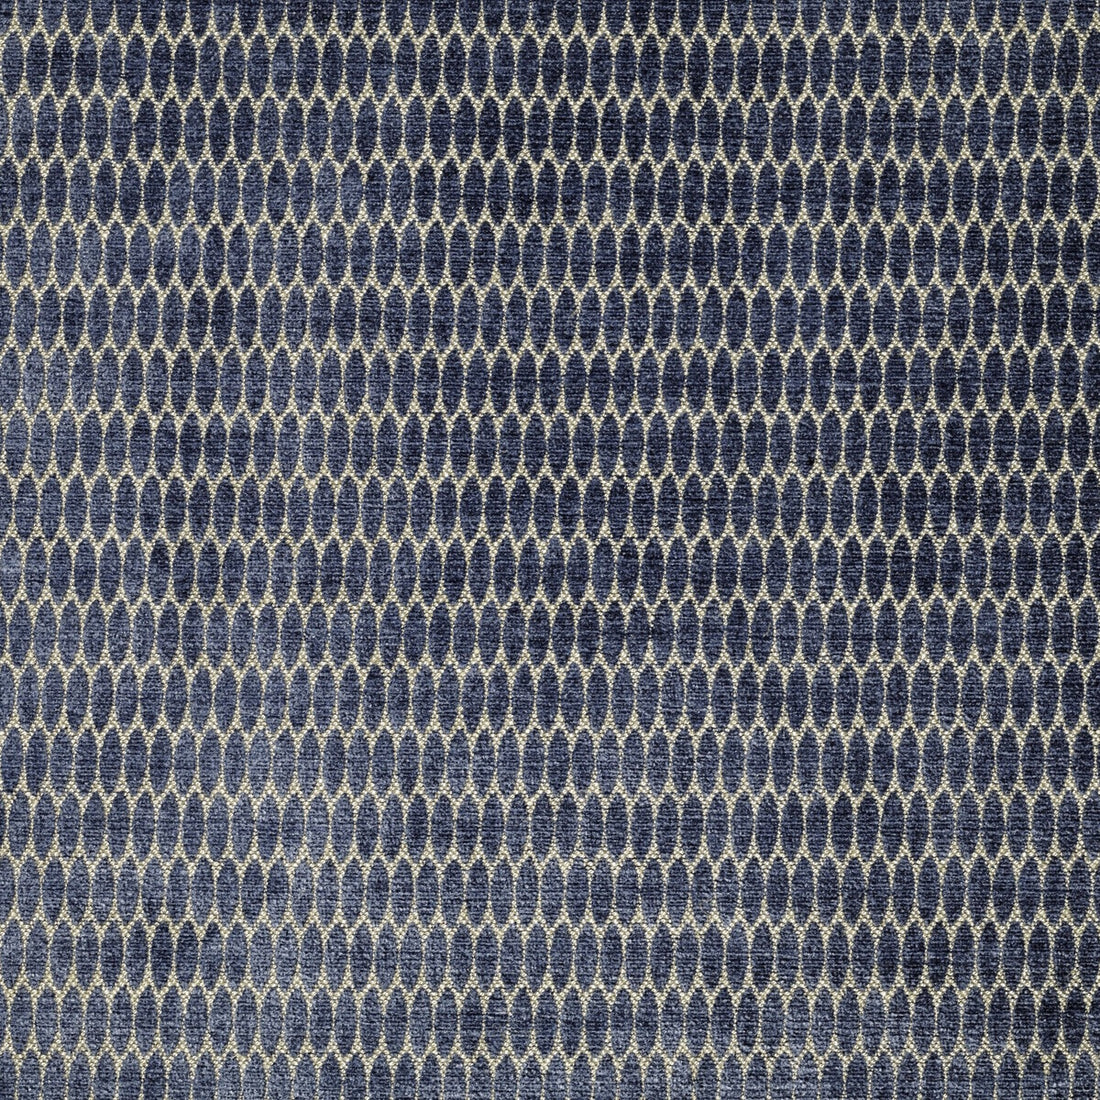 Compton fabric in dark blue color - pattern BFC-3658.50.0 - by Lee Jofa in the Blithfield collection